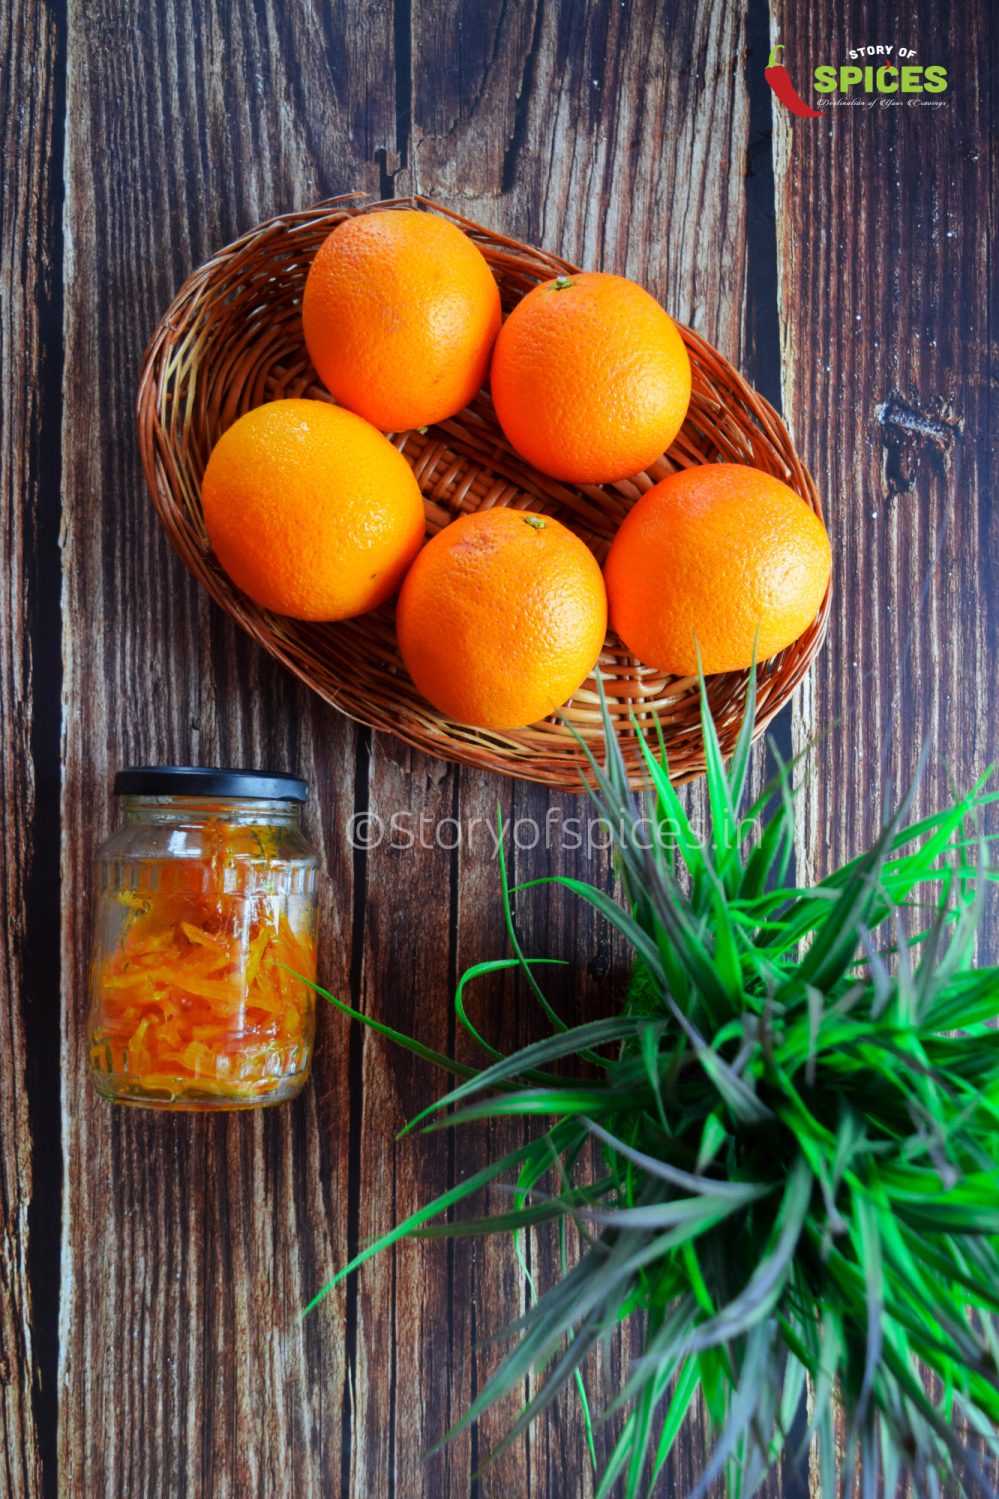 Candied-Orange-Peel-Recipe-Story-of-spices